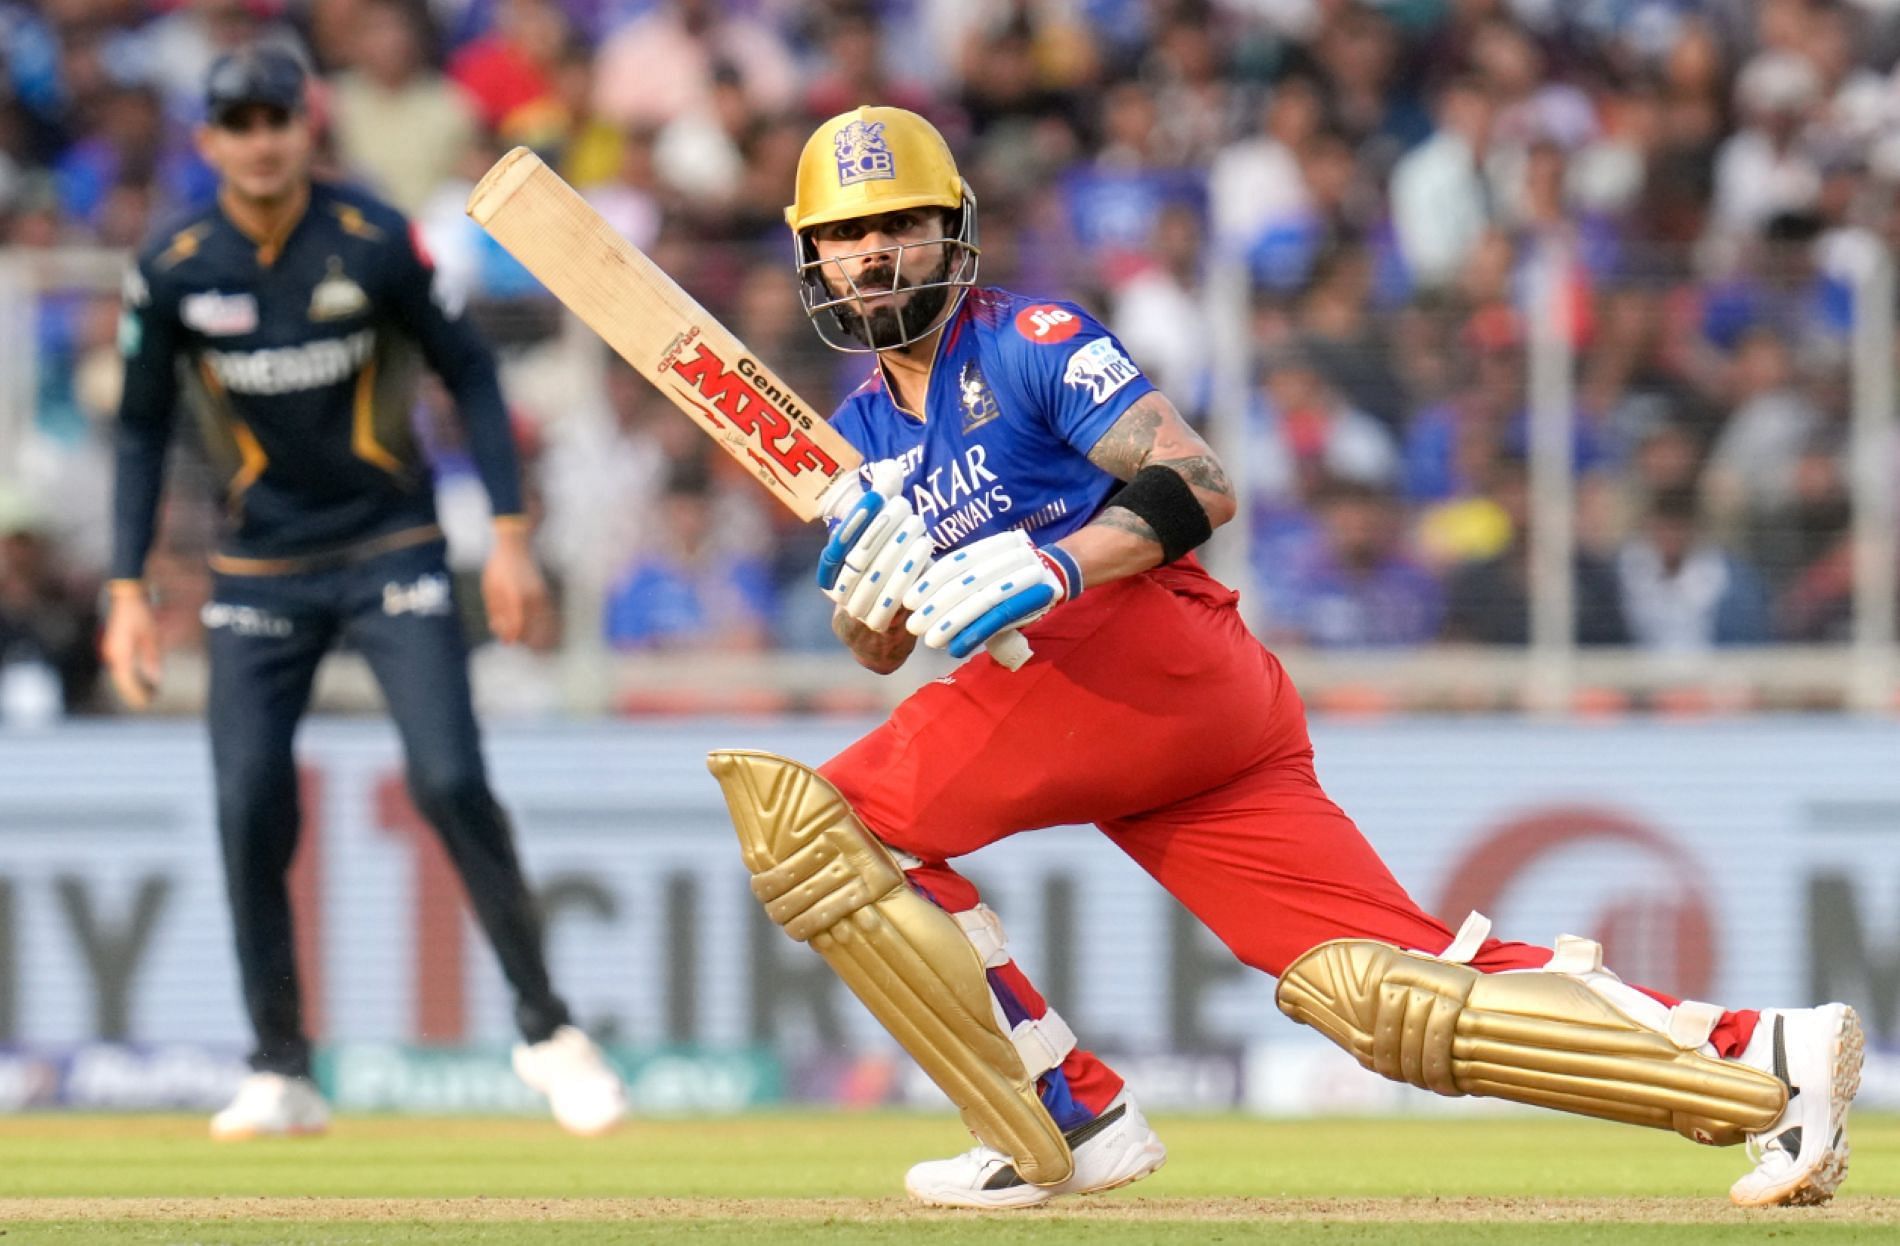 Kohli has been in scintillating form in the ongoing IPL [Credit: IPL Twitter handle]